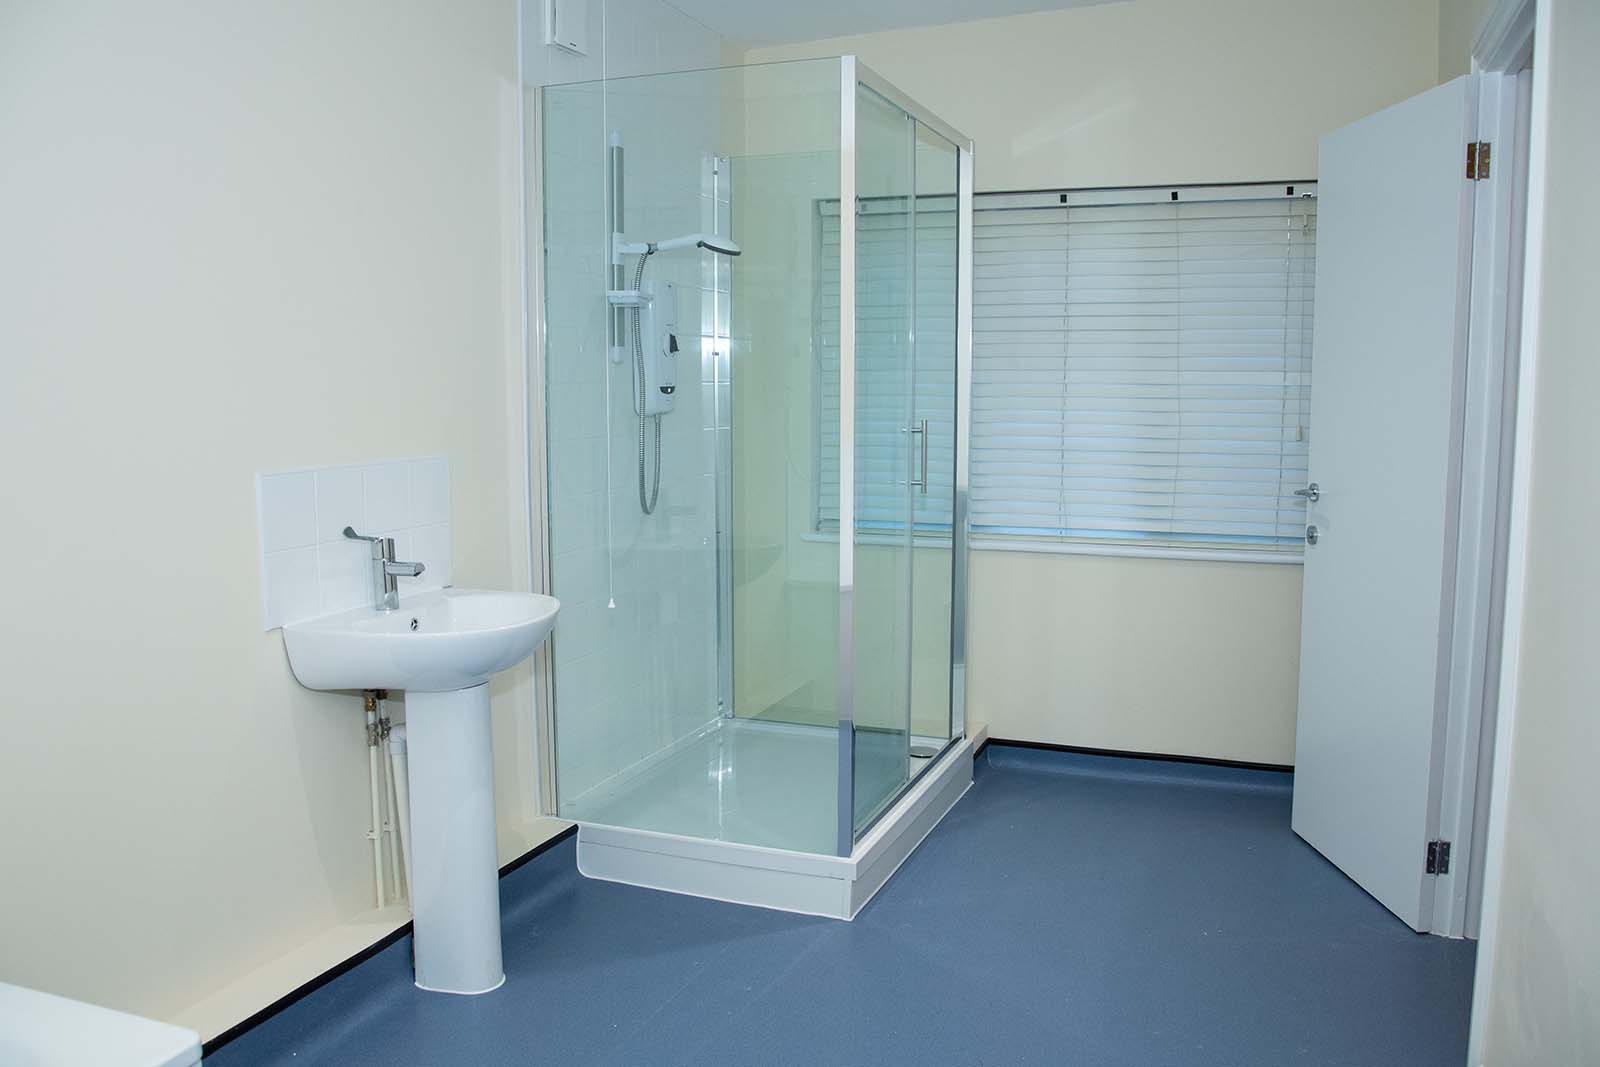 A bathroom with a blue floor, a glass shower and a sink and one window